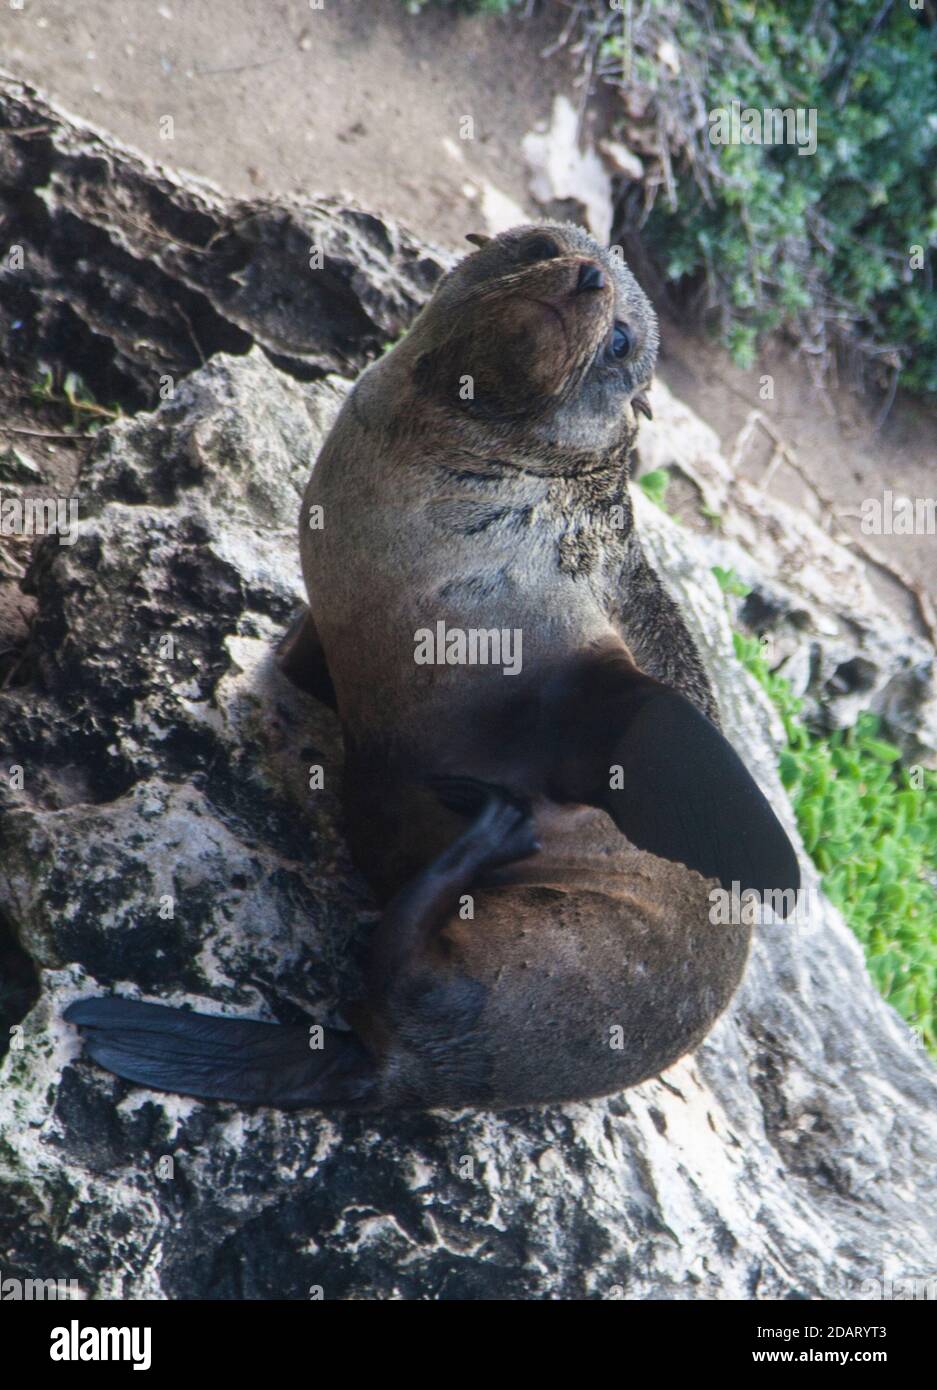 Neuseeland Pelzrobbe (Arctocephalus forsteri) auch als Long-Noced fur Seal, Admirals Arch, Flinders Chase NP. Stockfoto